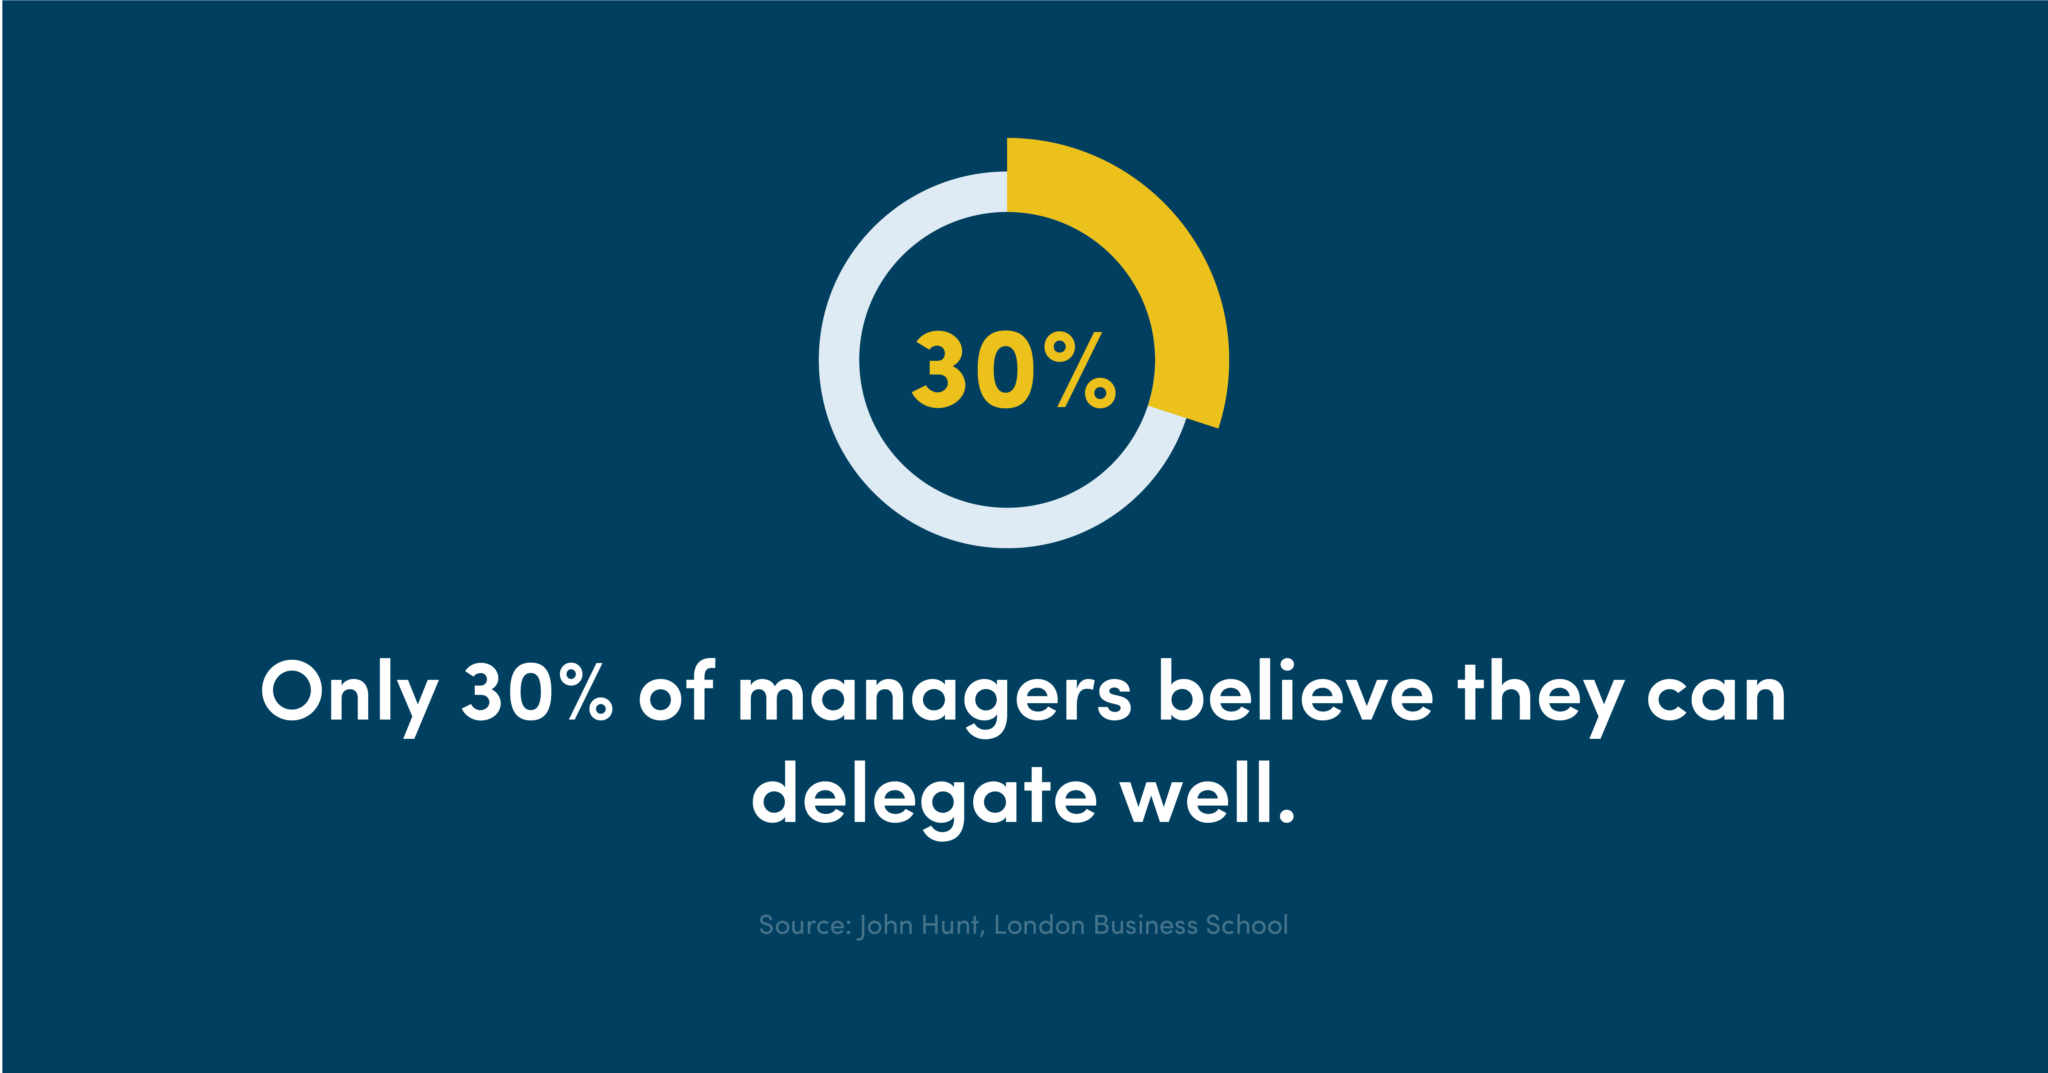 Only 30% of managers believe they can delegate well.